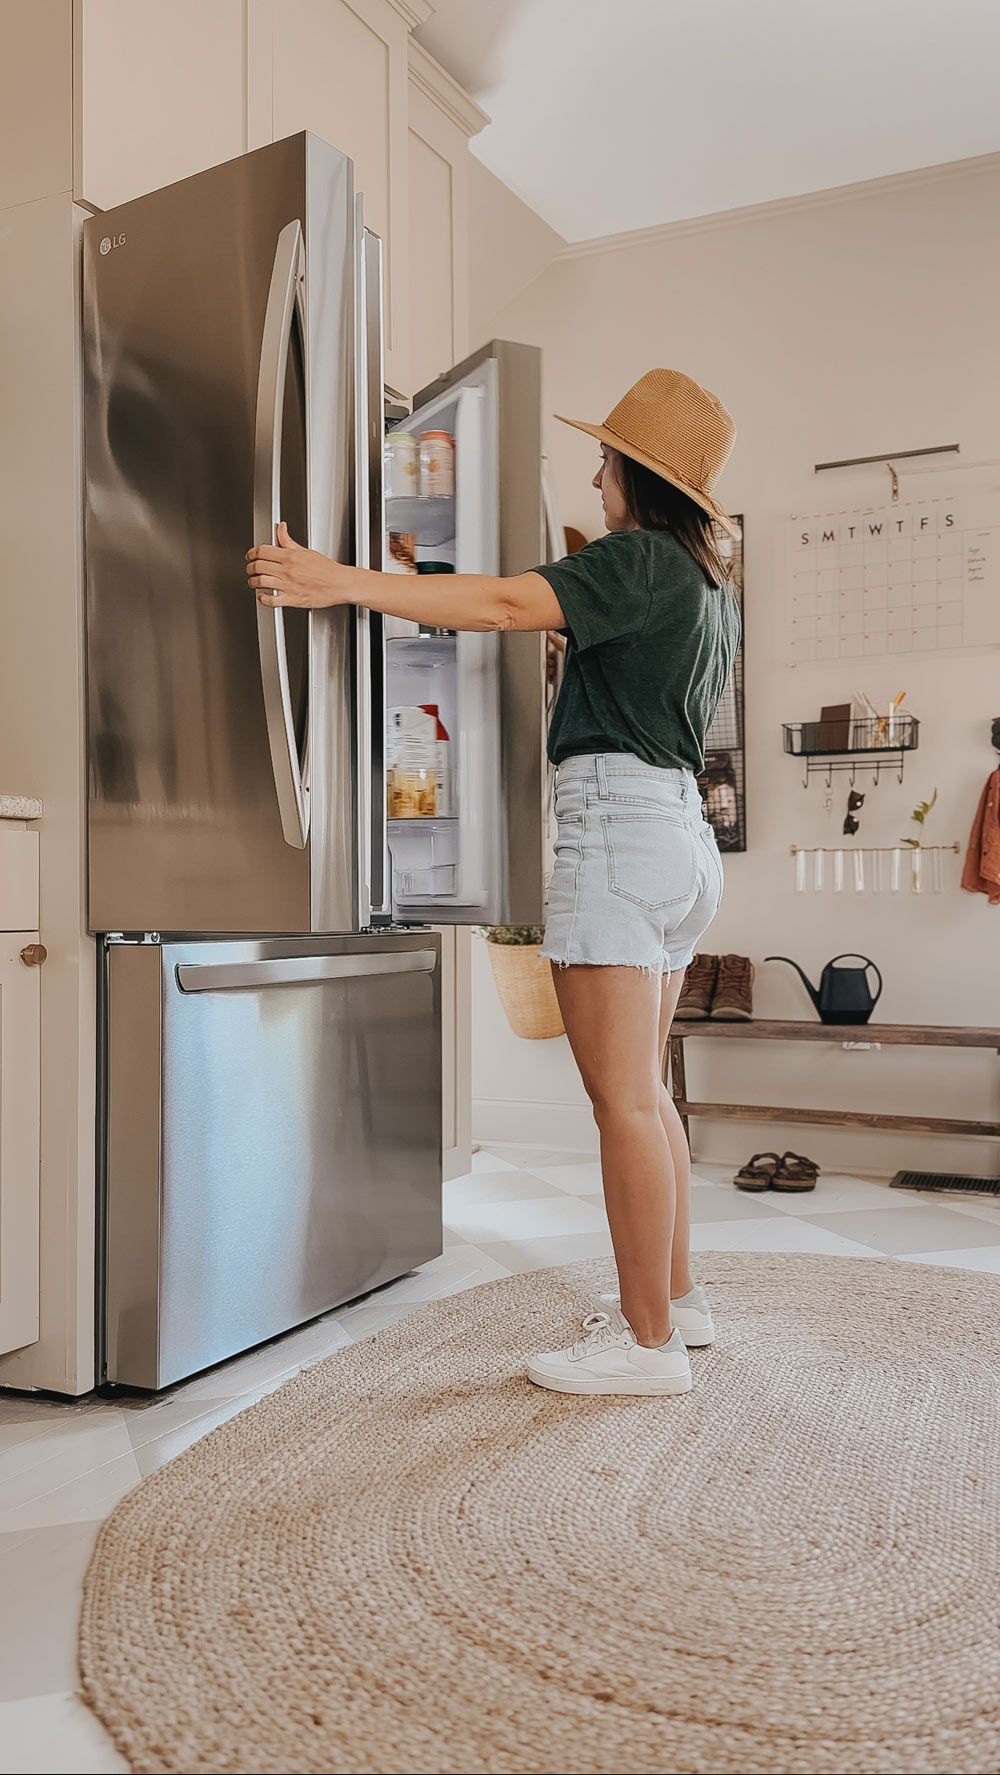  A person opening a refrigerator.